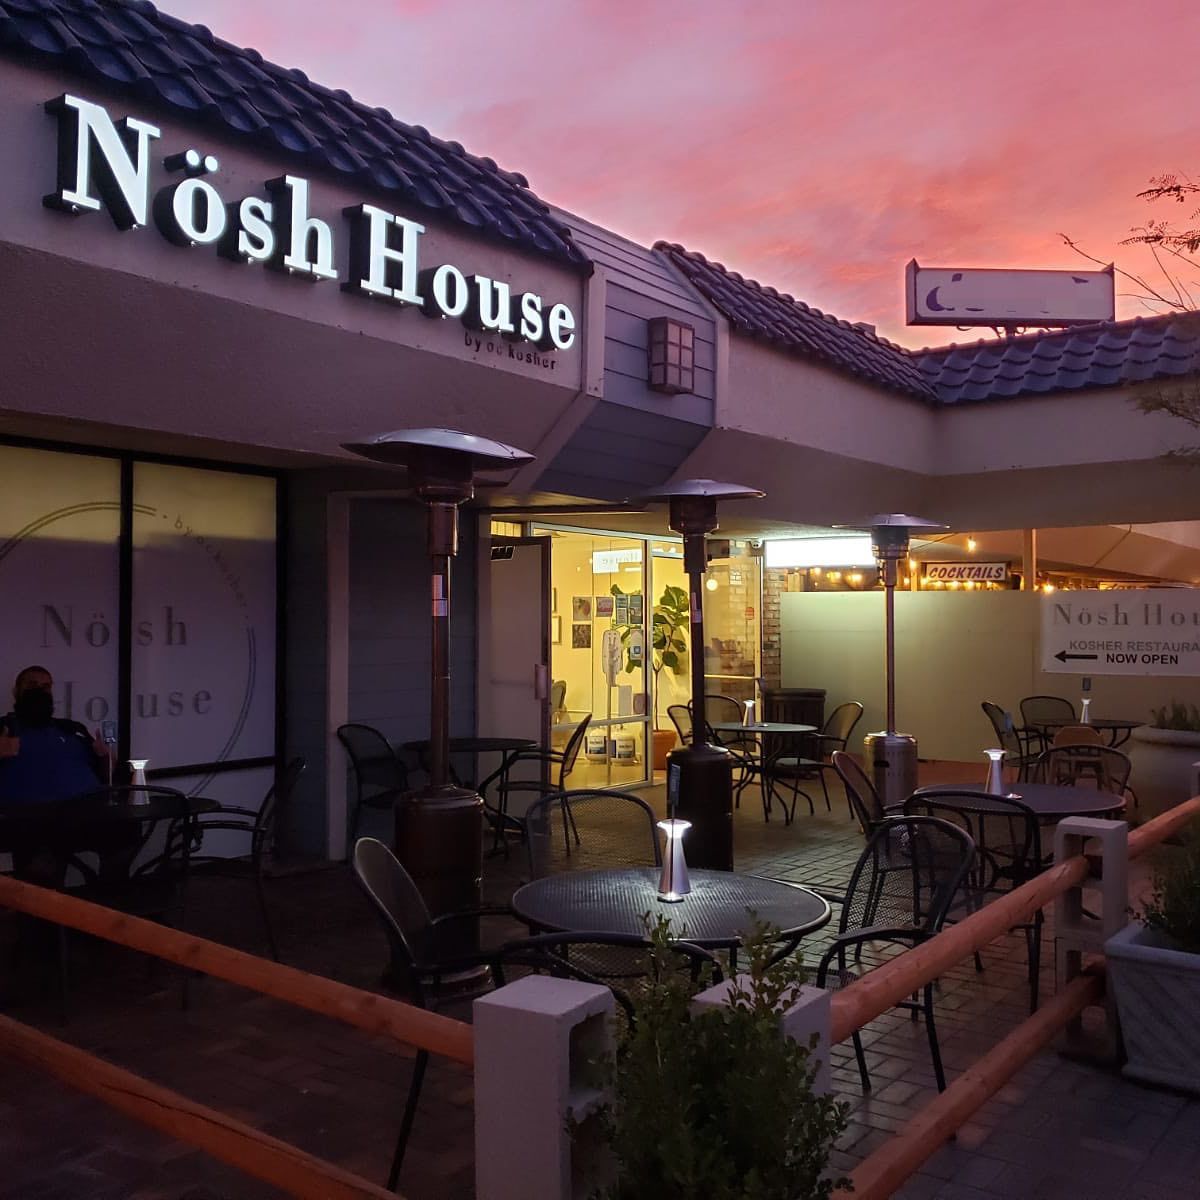 A small strip mall patio for a restaurant during a blazing sunset.